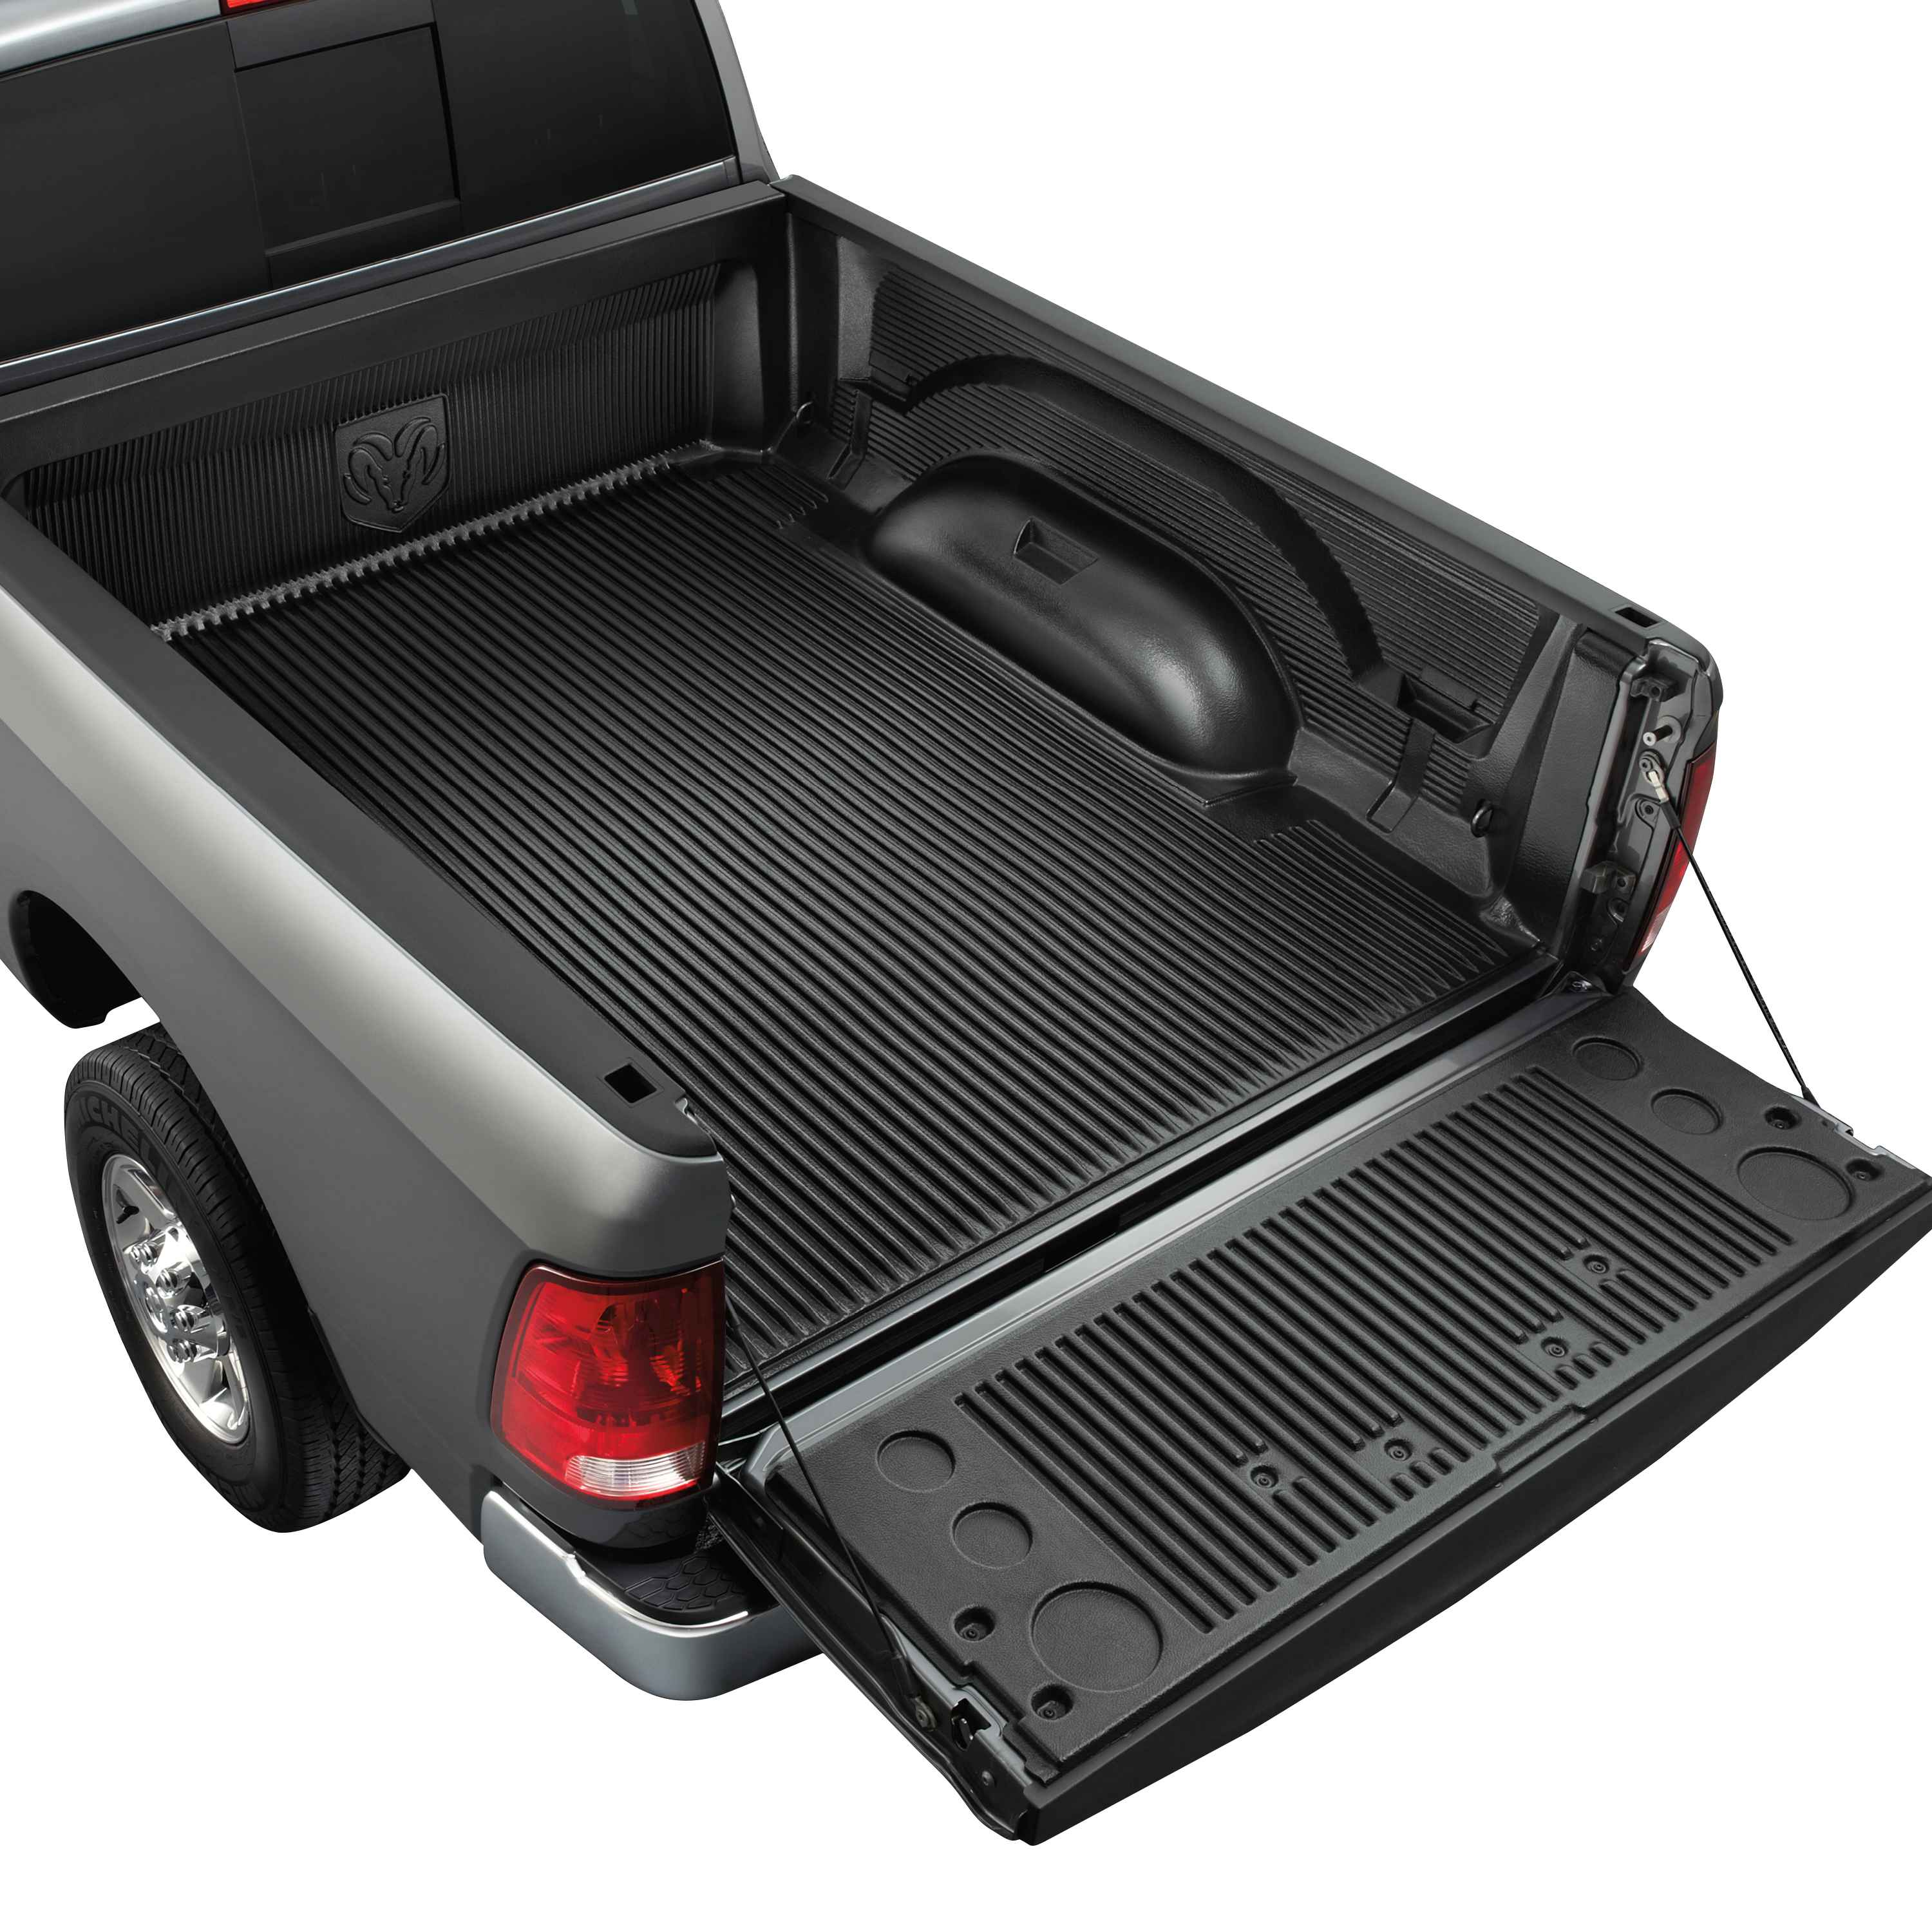 OEM 2014 Ram 2500 HD Drop-In Bedliner for 64 Conventional Bed (Part #82214983AD)